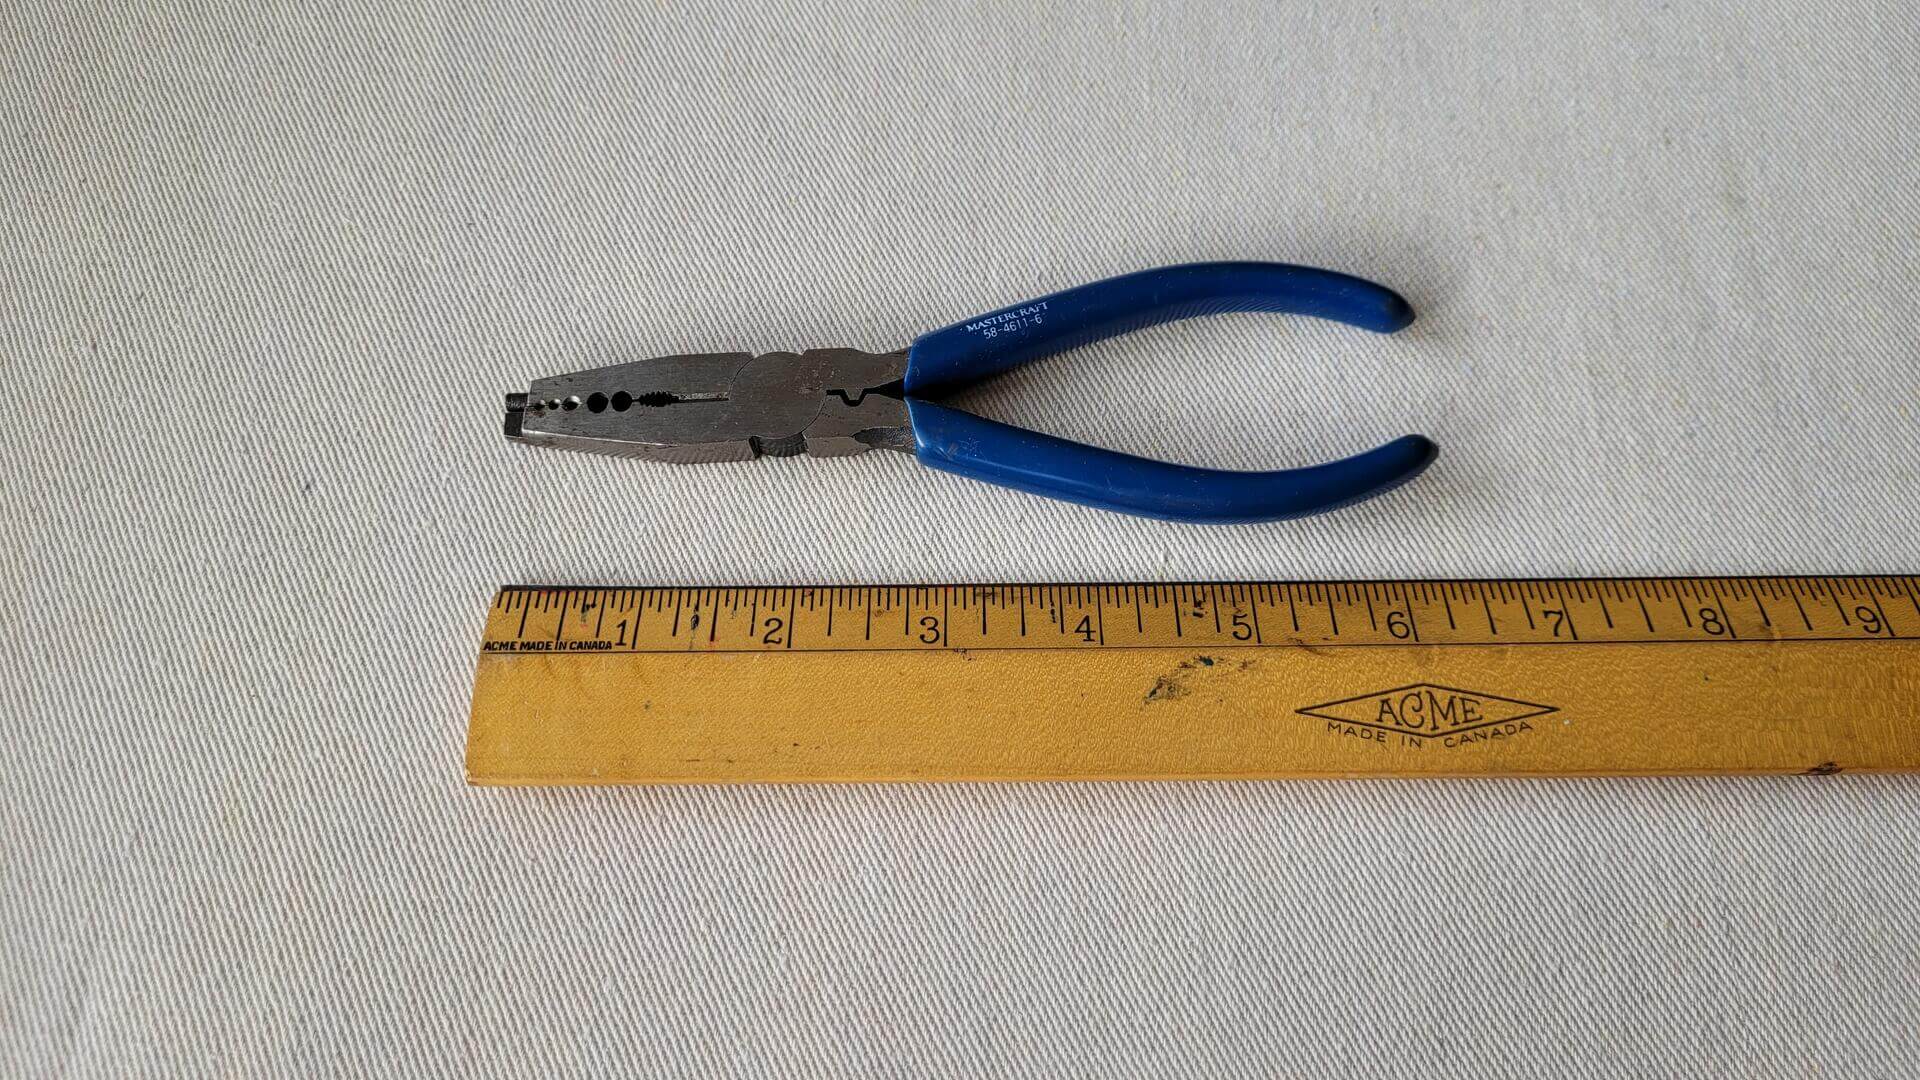 Vintage CTC Mastercraft #58-4611-6 electrician pliers multitool w wire strippers, cutters, terminal crimper, grippers & jaw tip anvil used to make wire loops